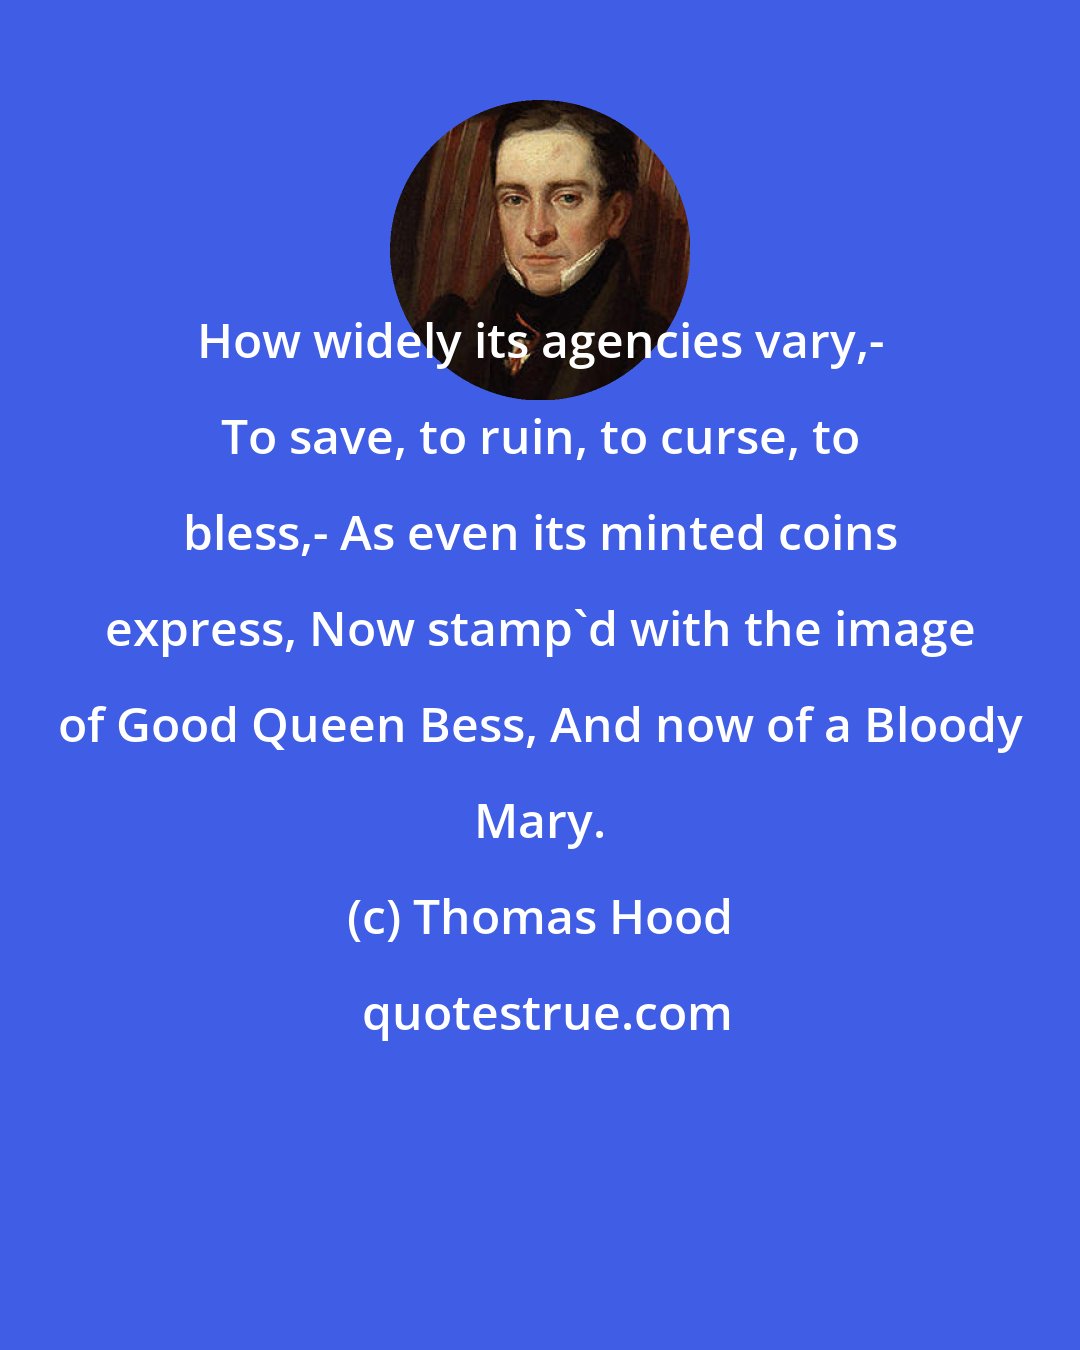 Thomas Hood: How widely its agencies vary,- To save, to ruin, to curse, to bless,- As even its minted coins express, Now stamp'd with the image of Good Queen Bess, And now of a Bloody Mary.